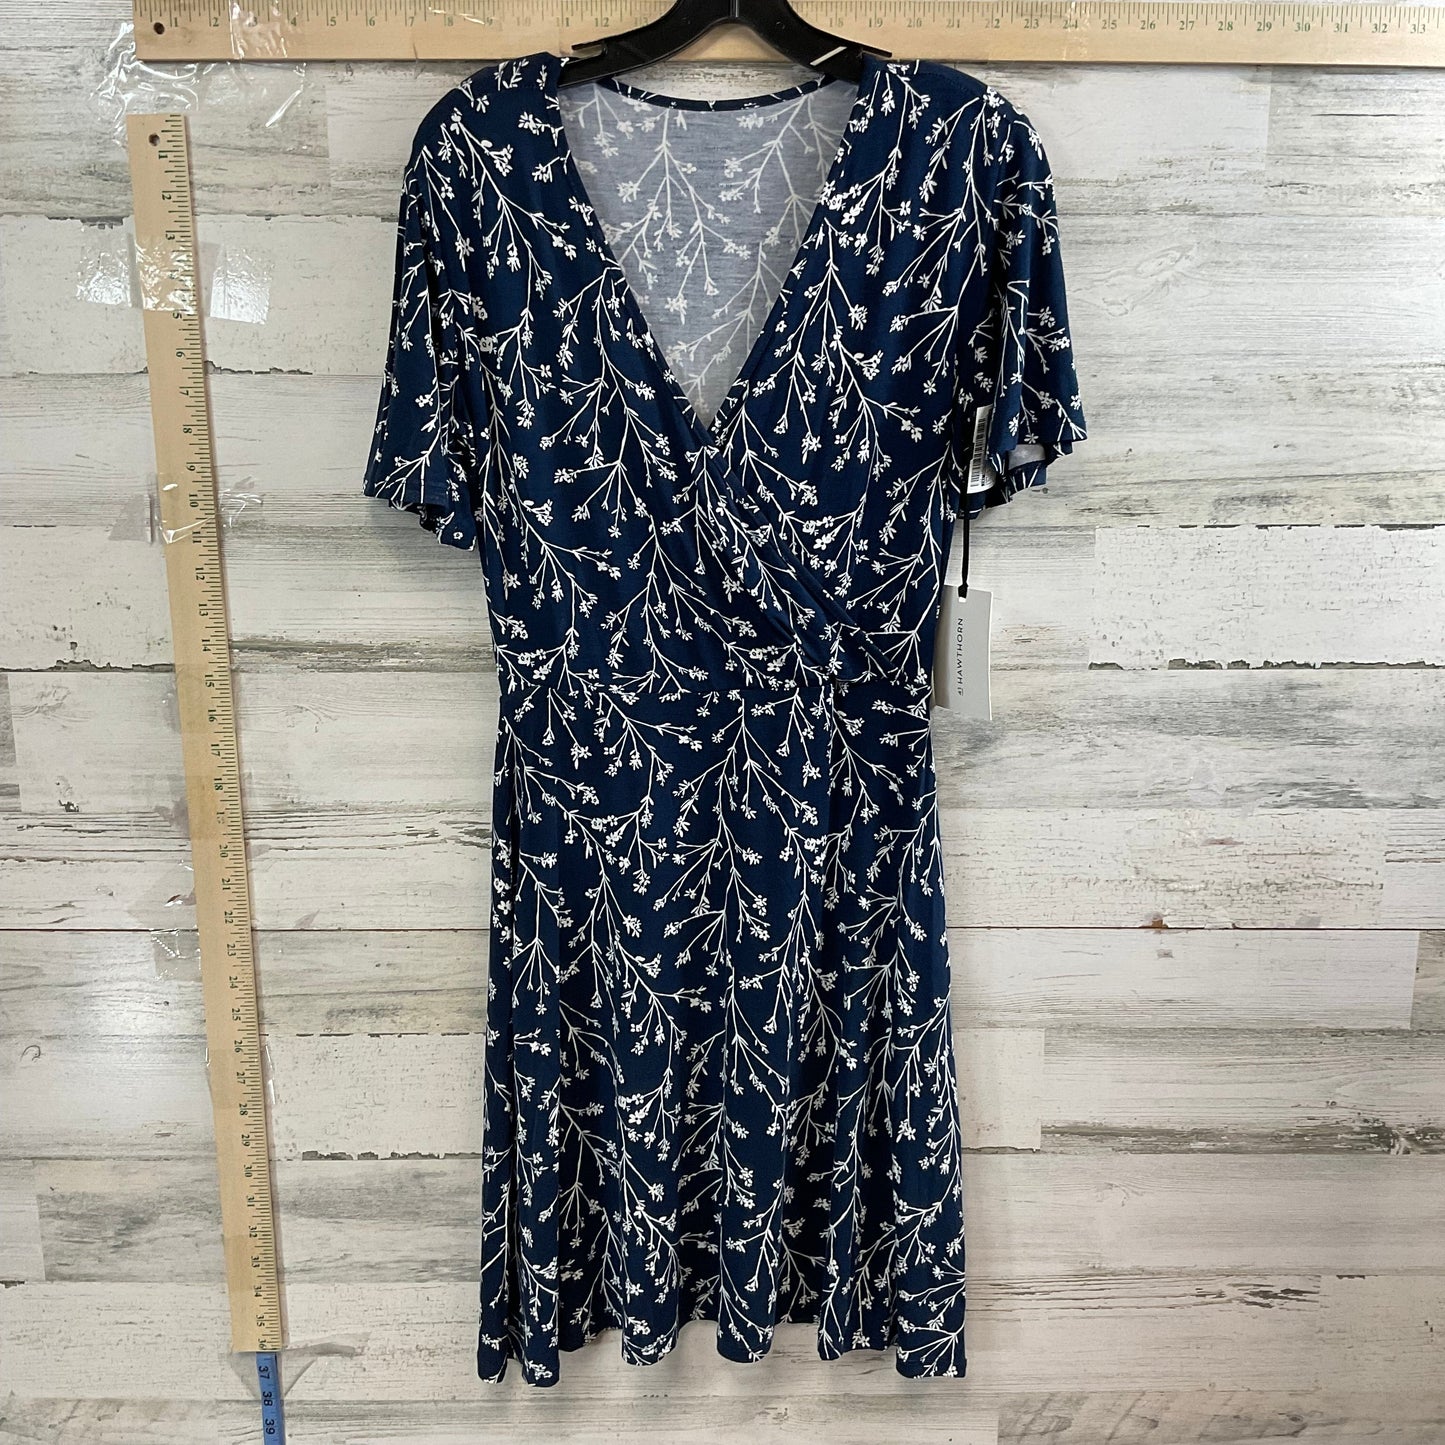 Blue & White Dress Casual Short 41 Hawthorn, Size S